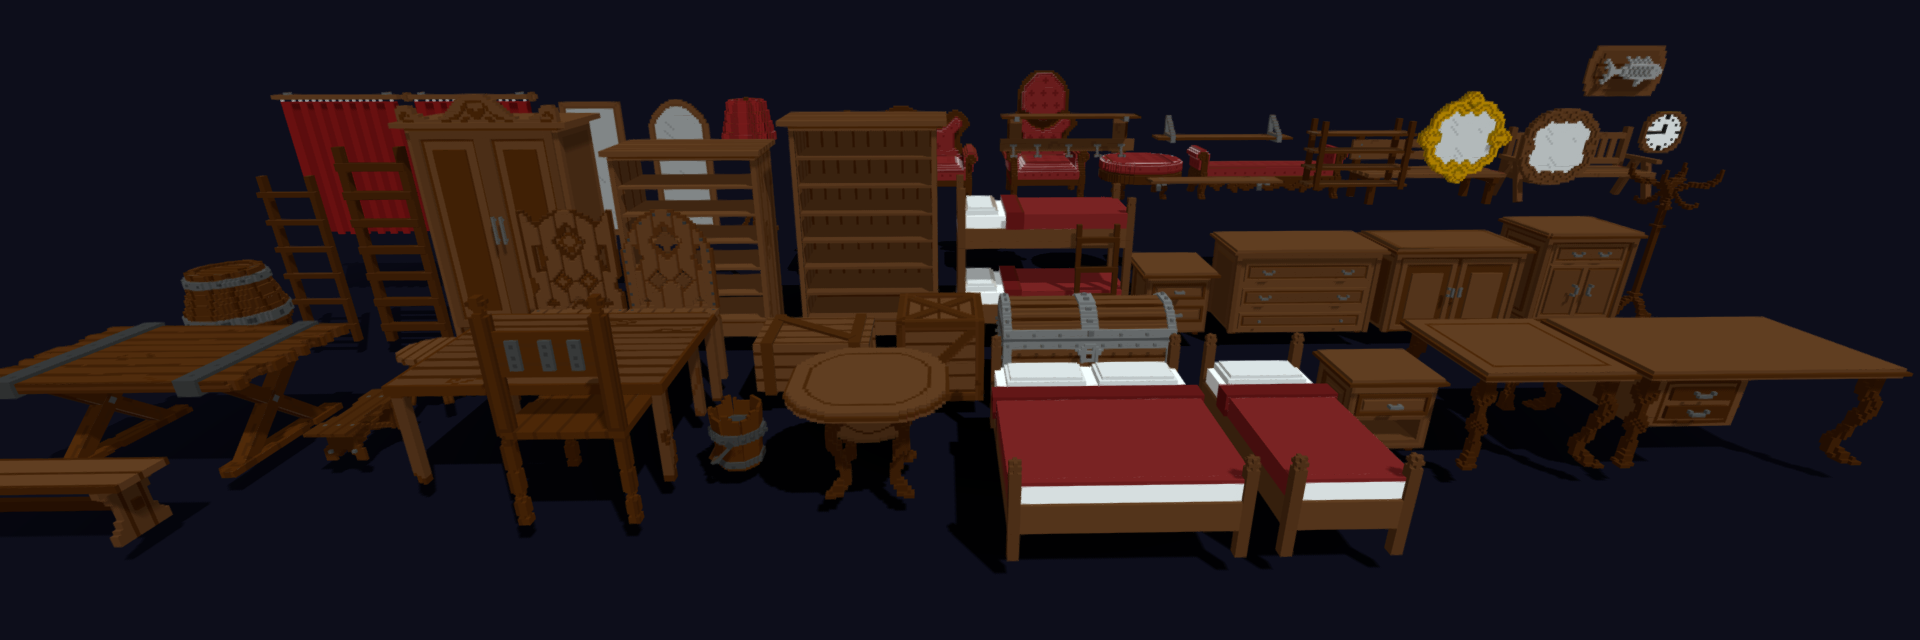 Props Pack - Voxel Low Poly Interior